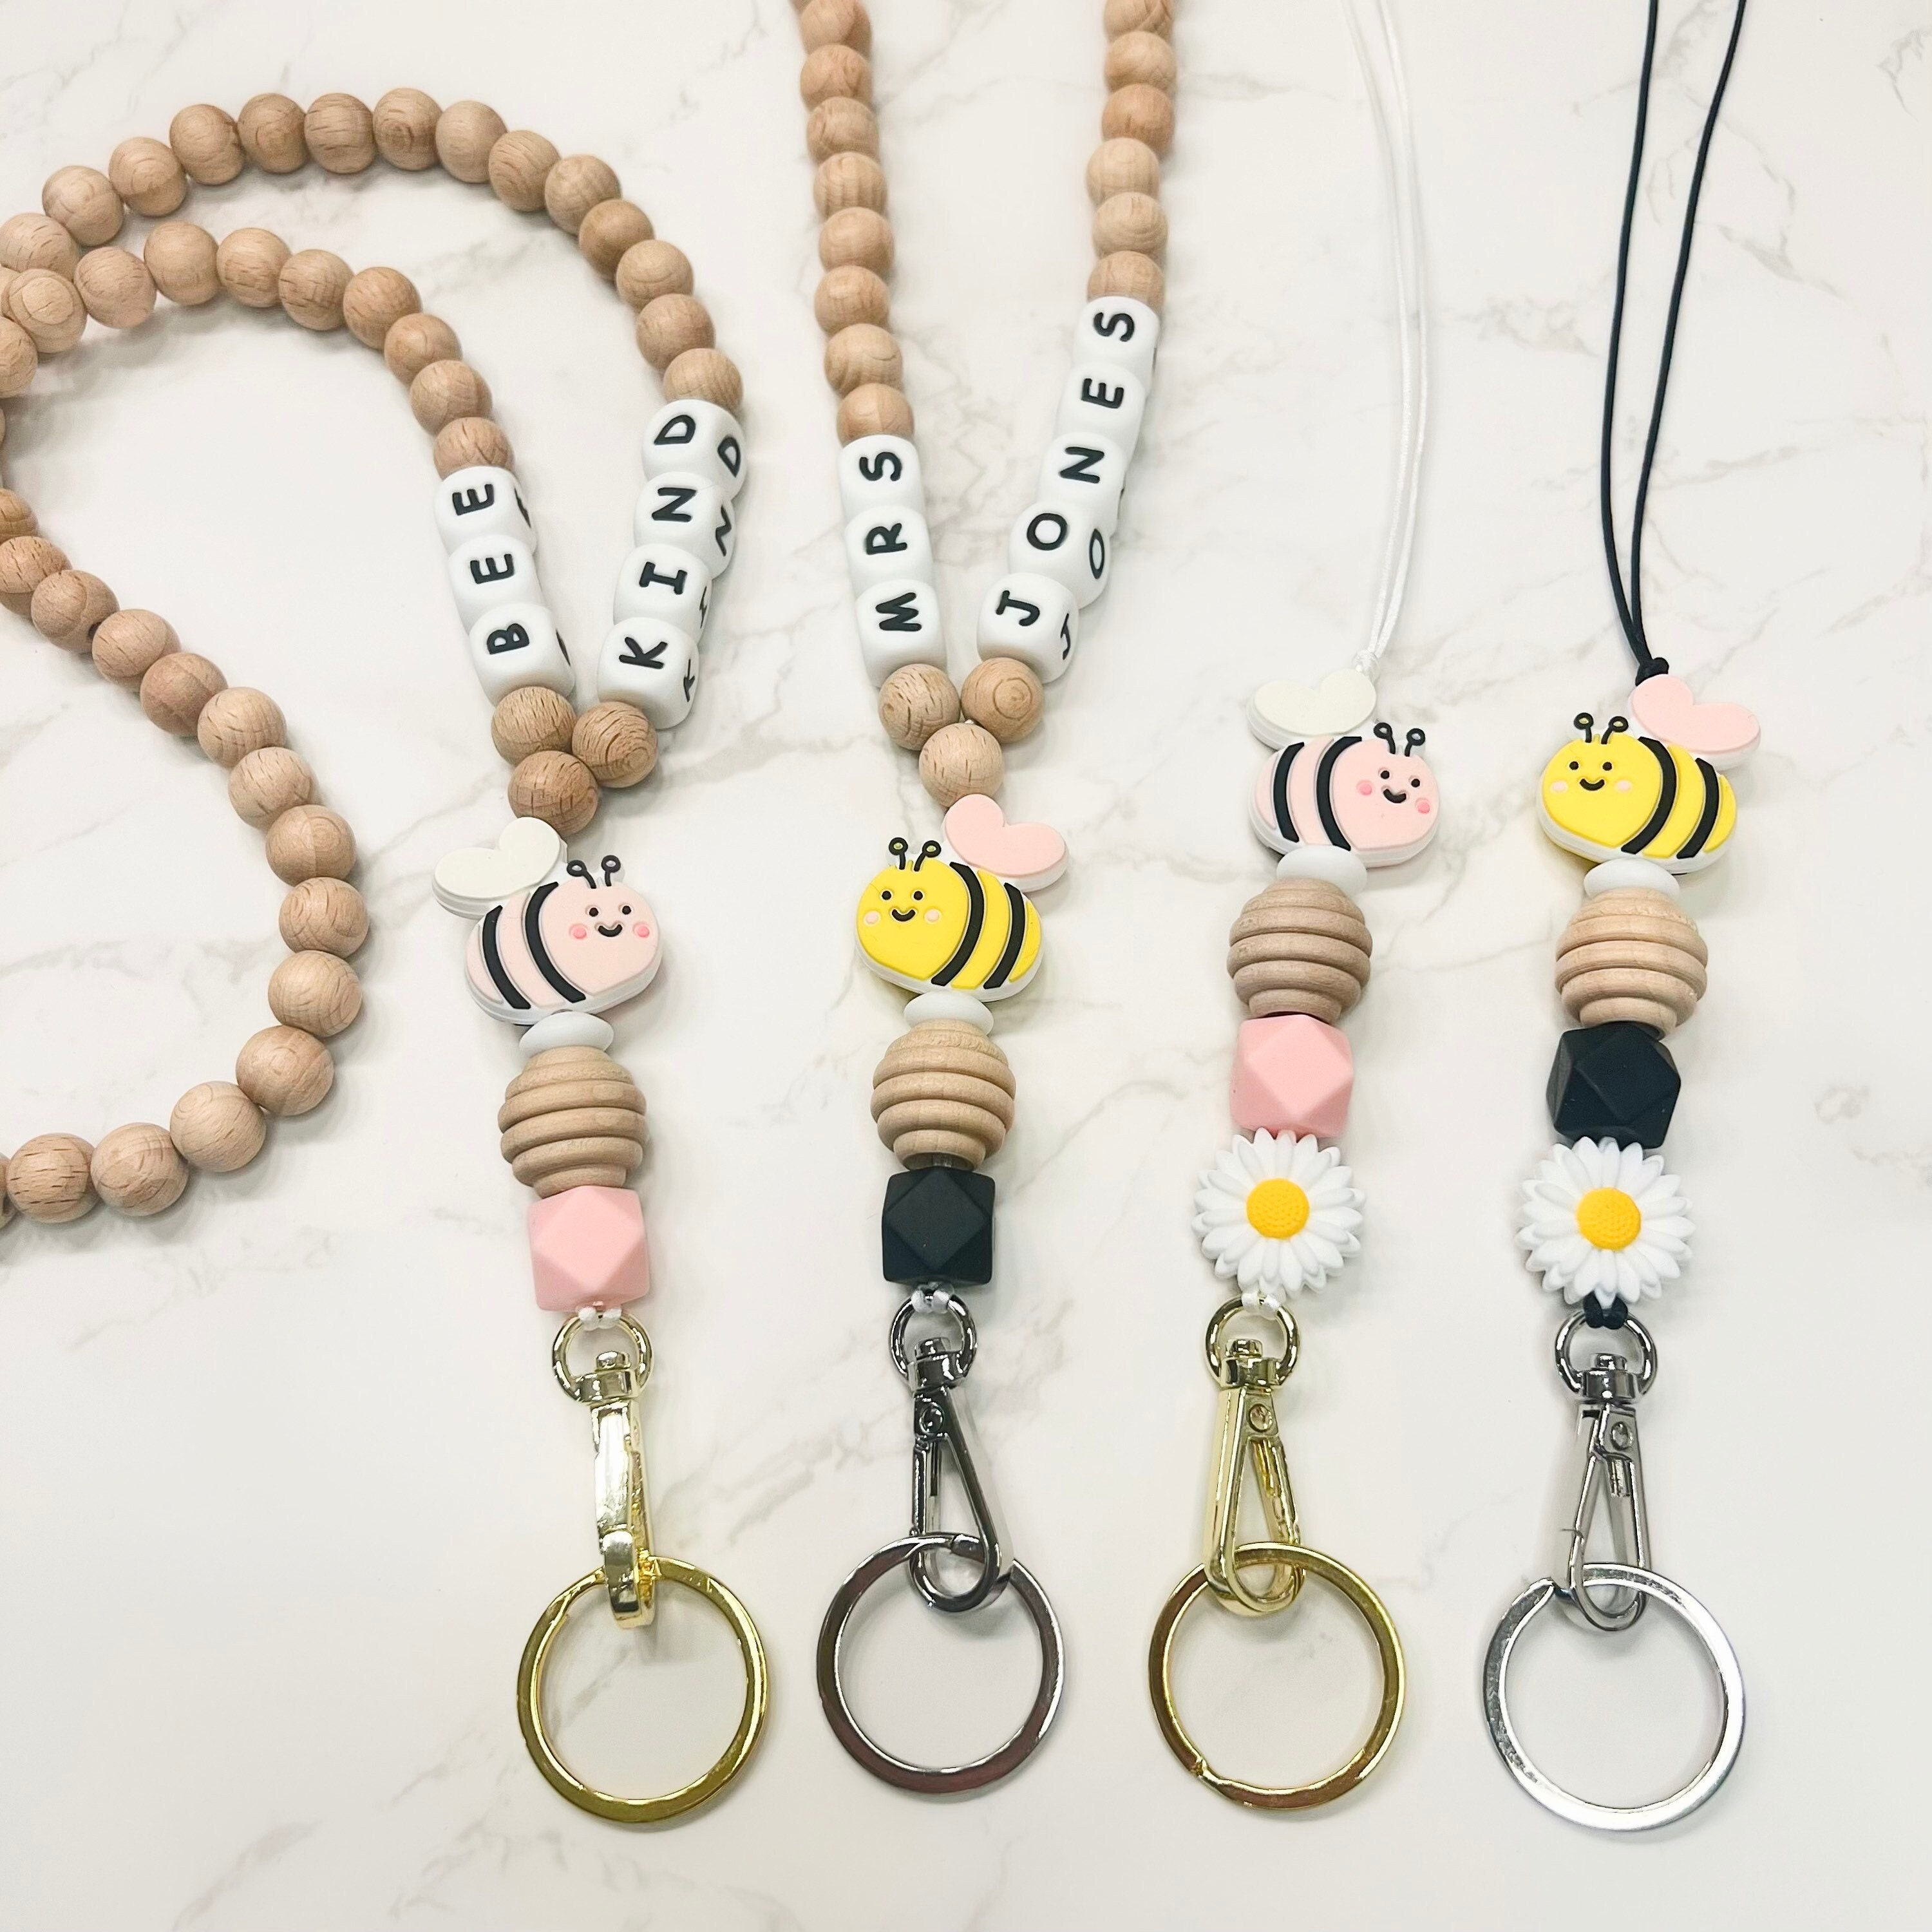 JUDODUCK Be Kind Lanyard with ID Badge Holder Phone Pad Girls